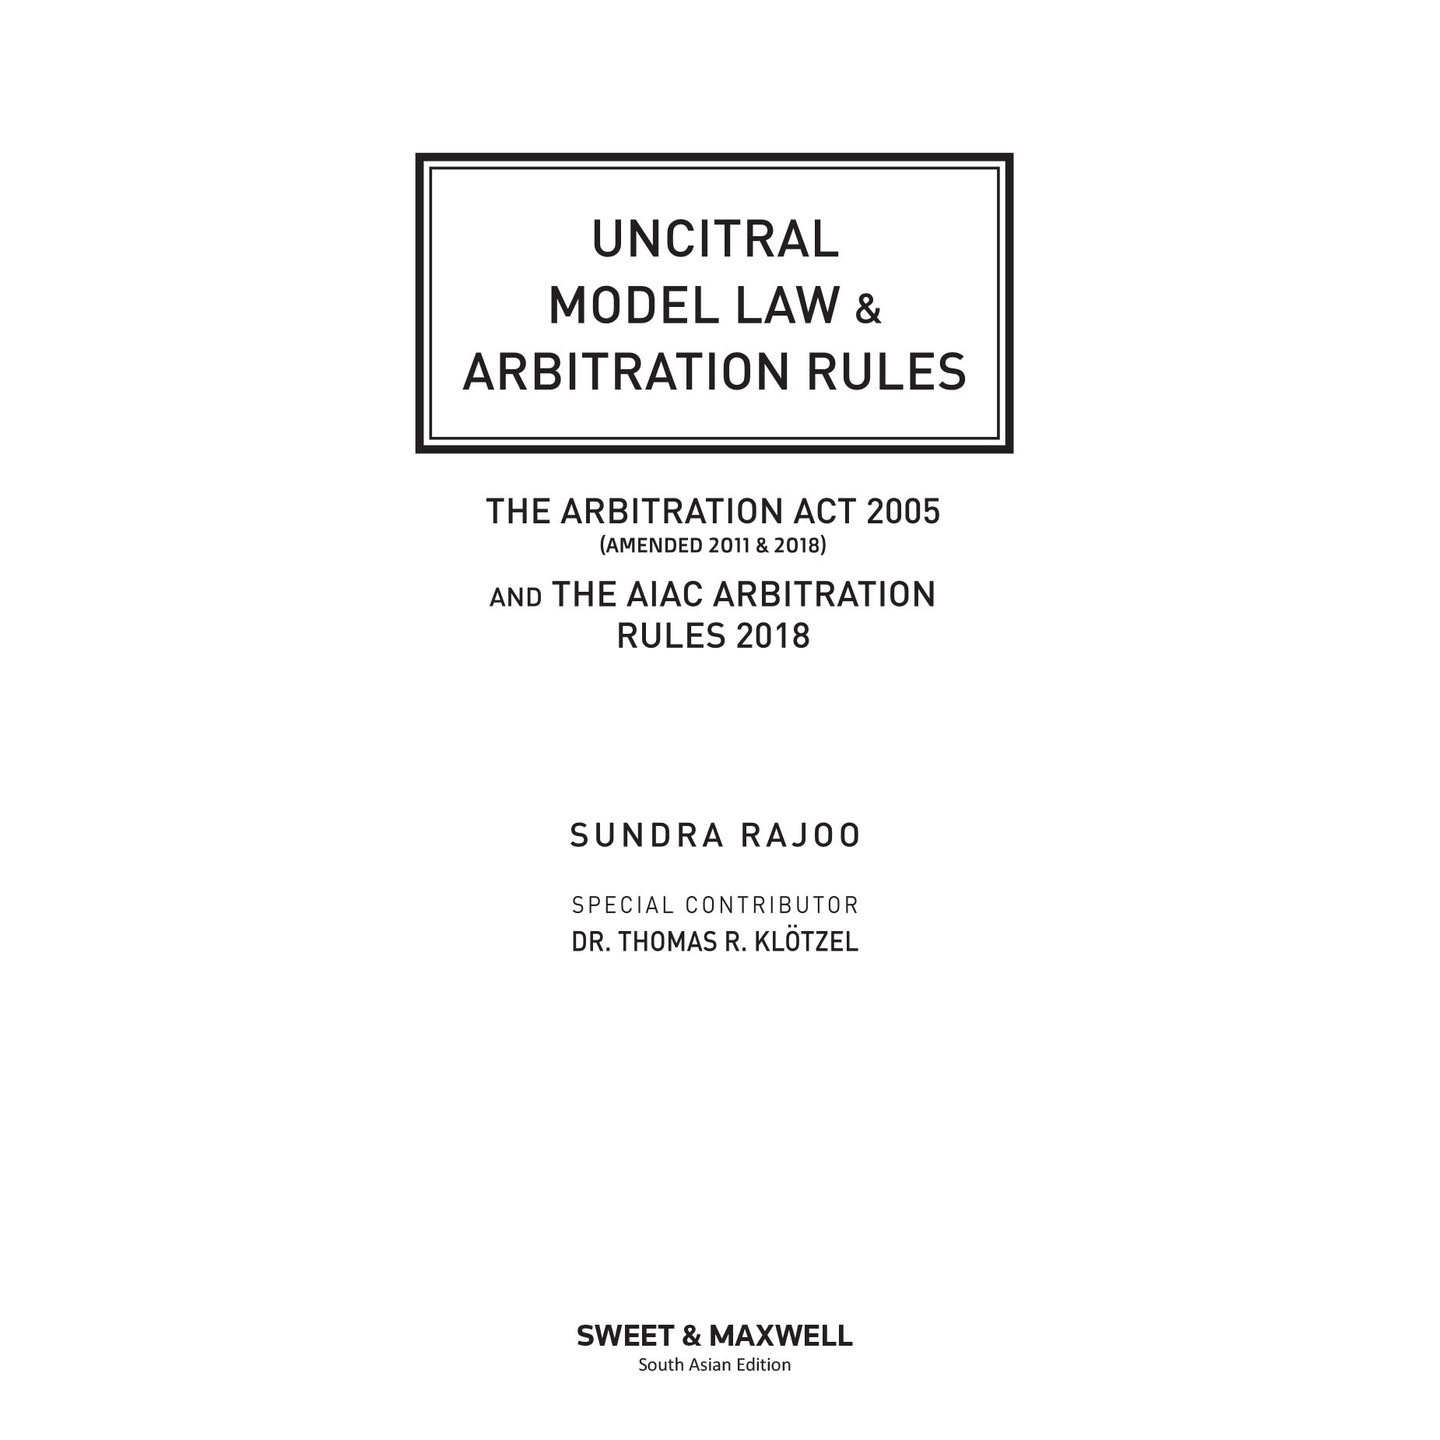 UNCITRAL MODEL LAW & ARBITRATION RULES